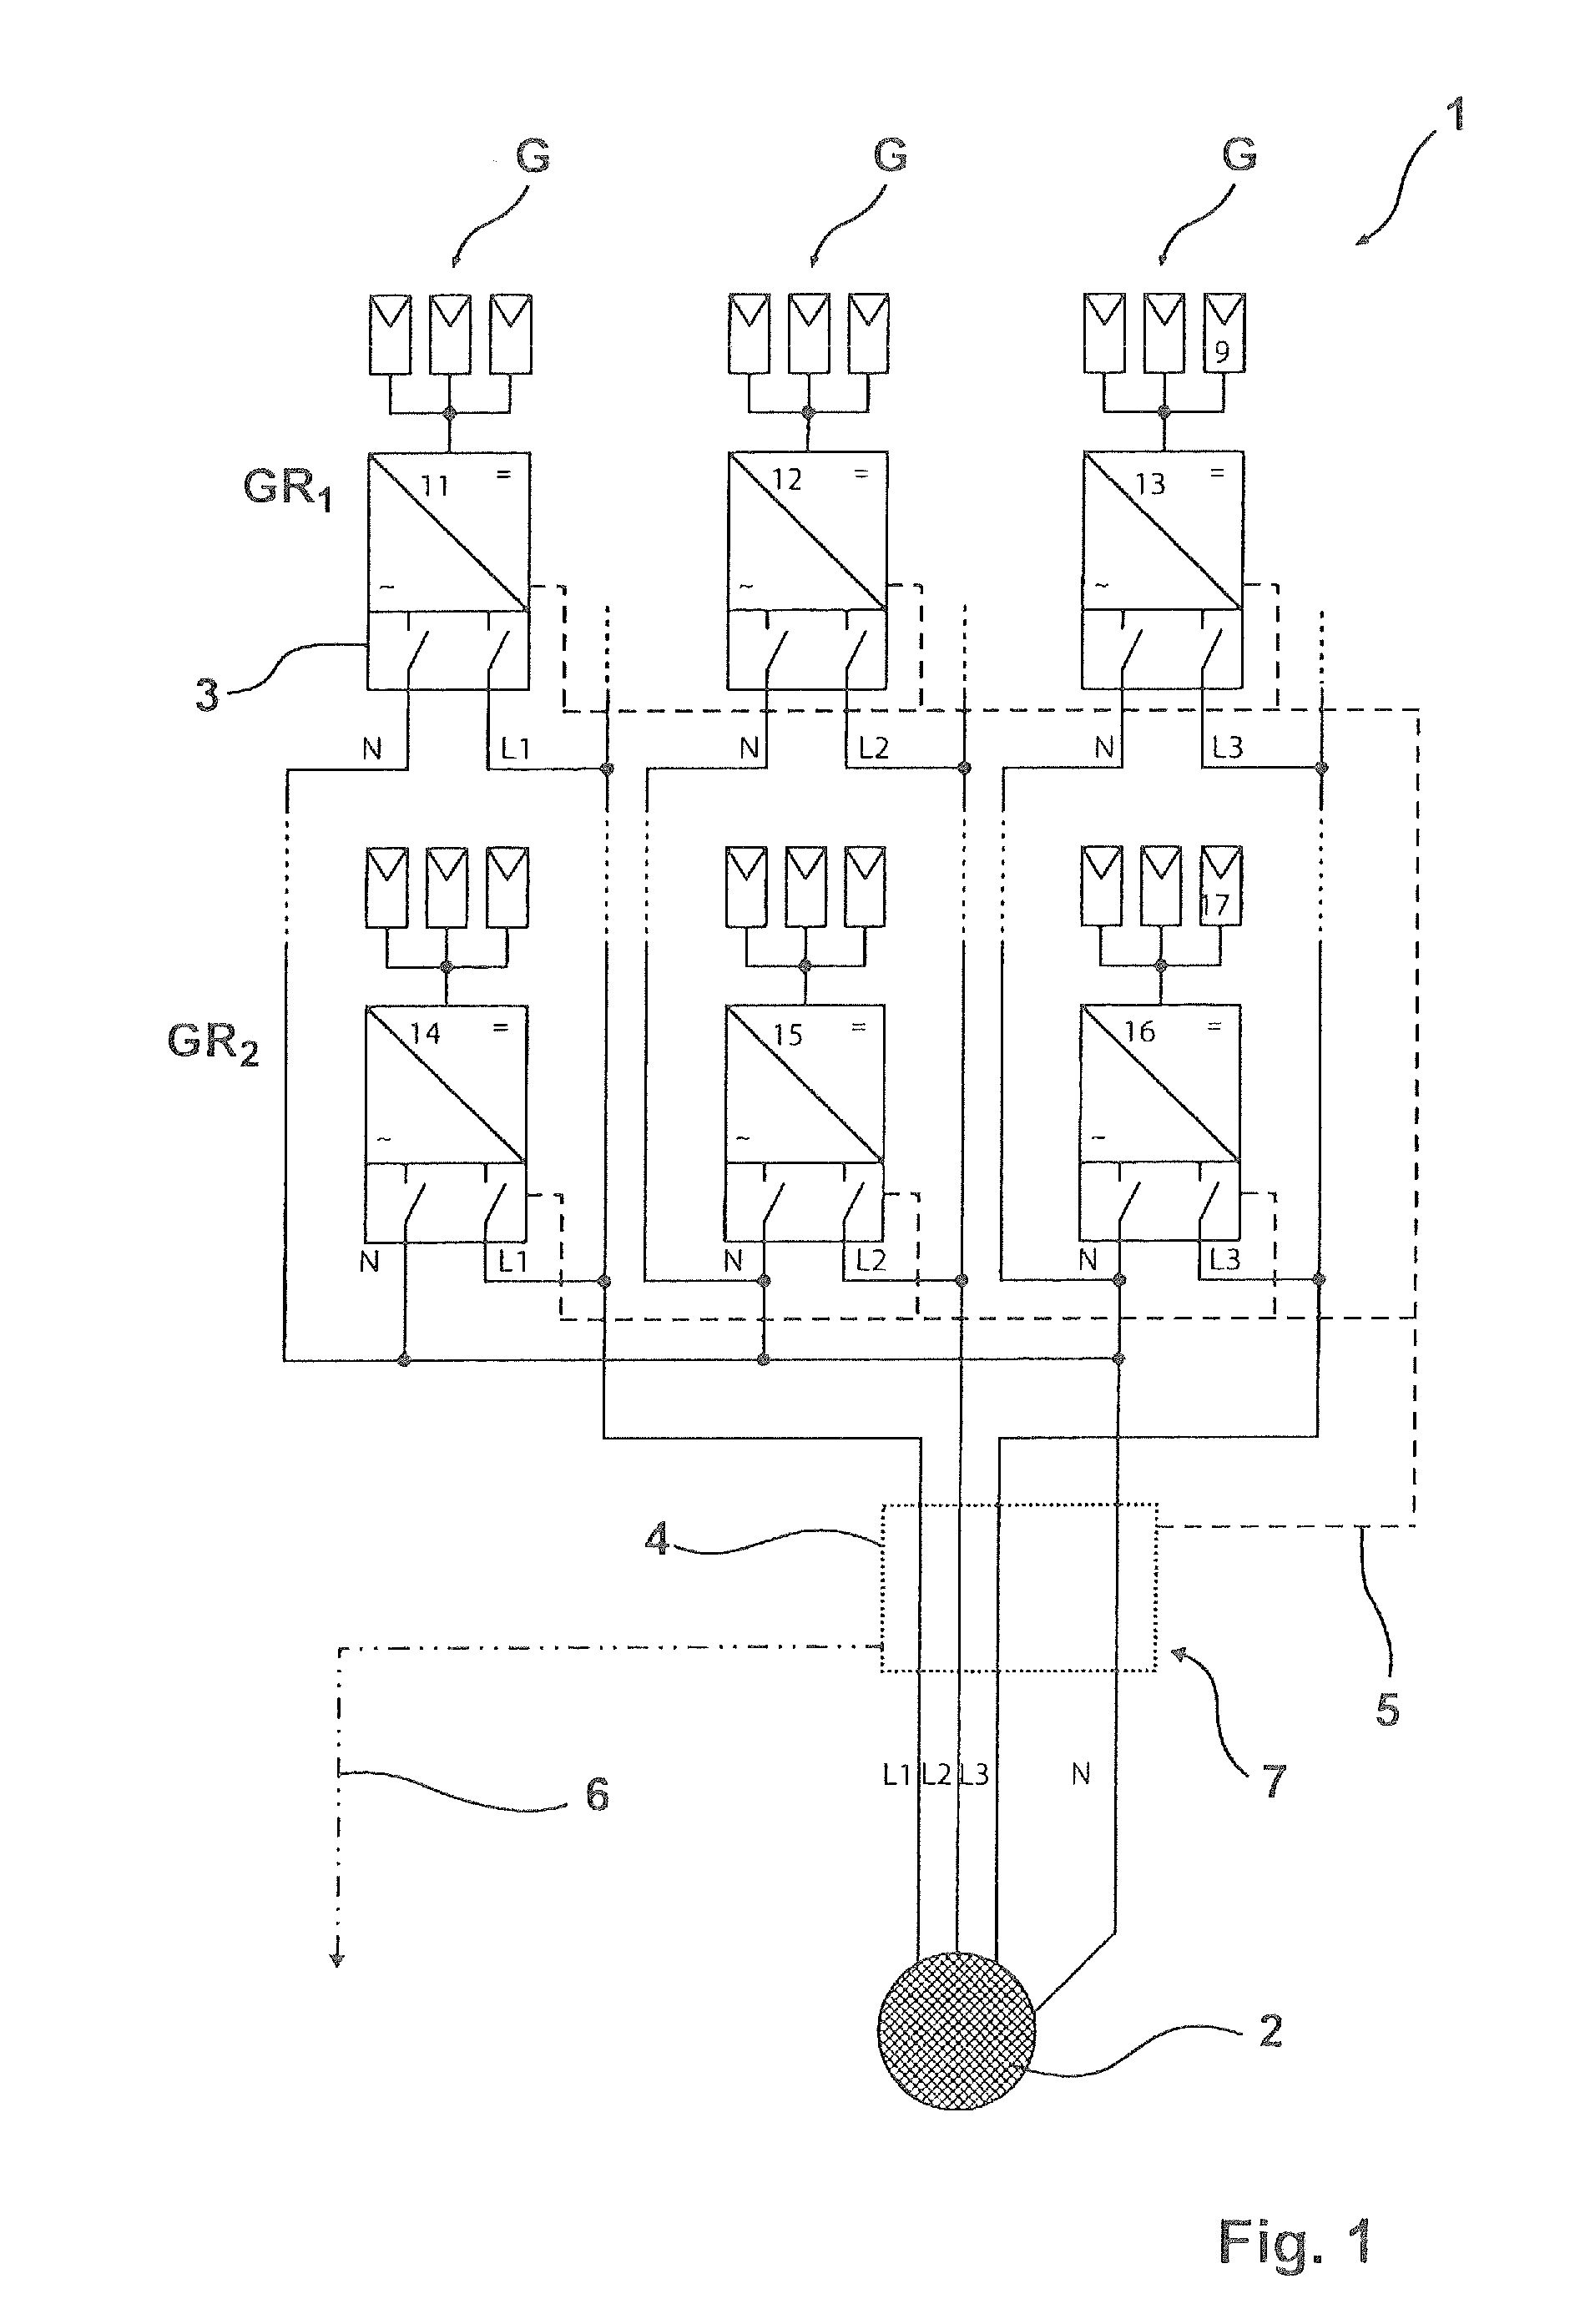 Photovoltaic system for feeding three-phase current into a power grid